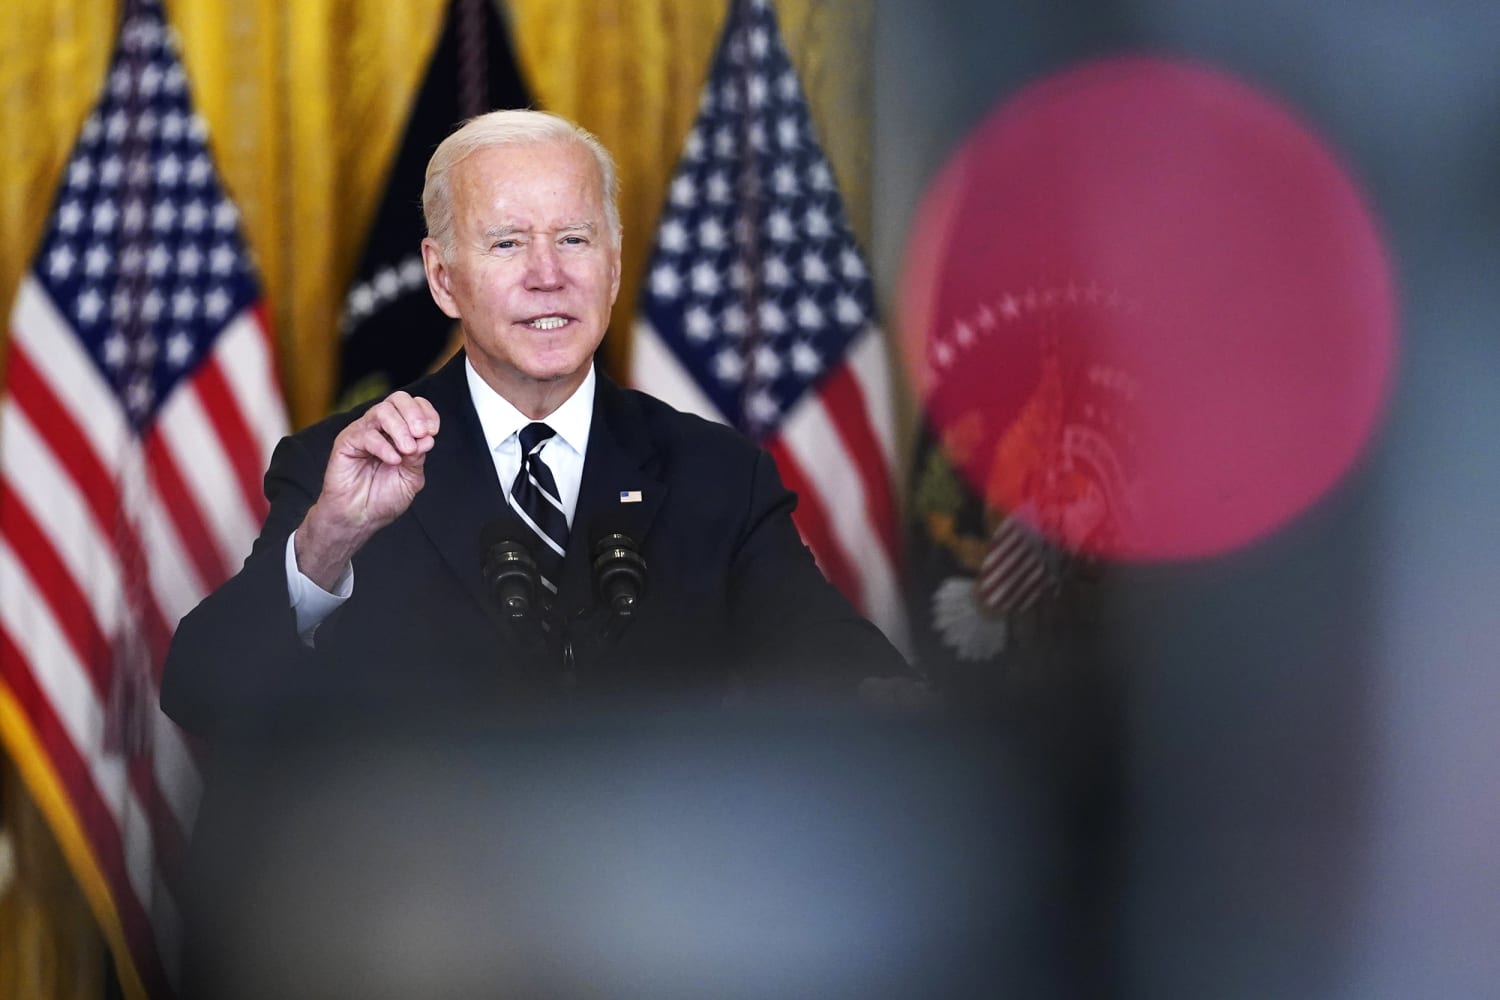 Biden’s future — and his party’s — depends on whether Democrats can unify